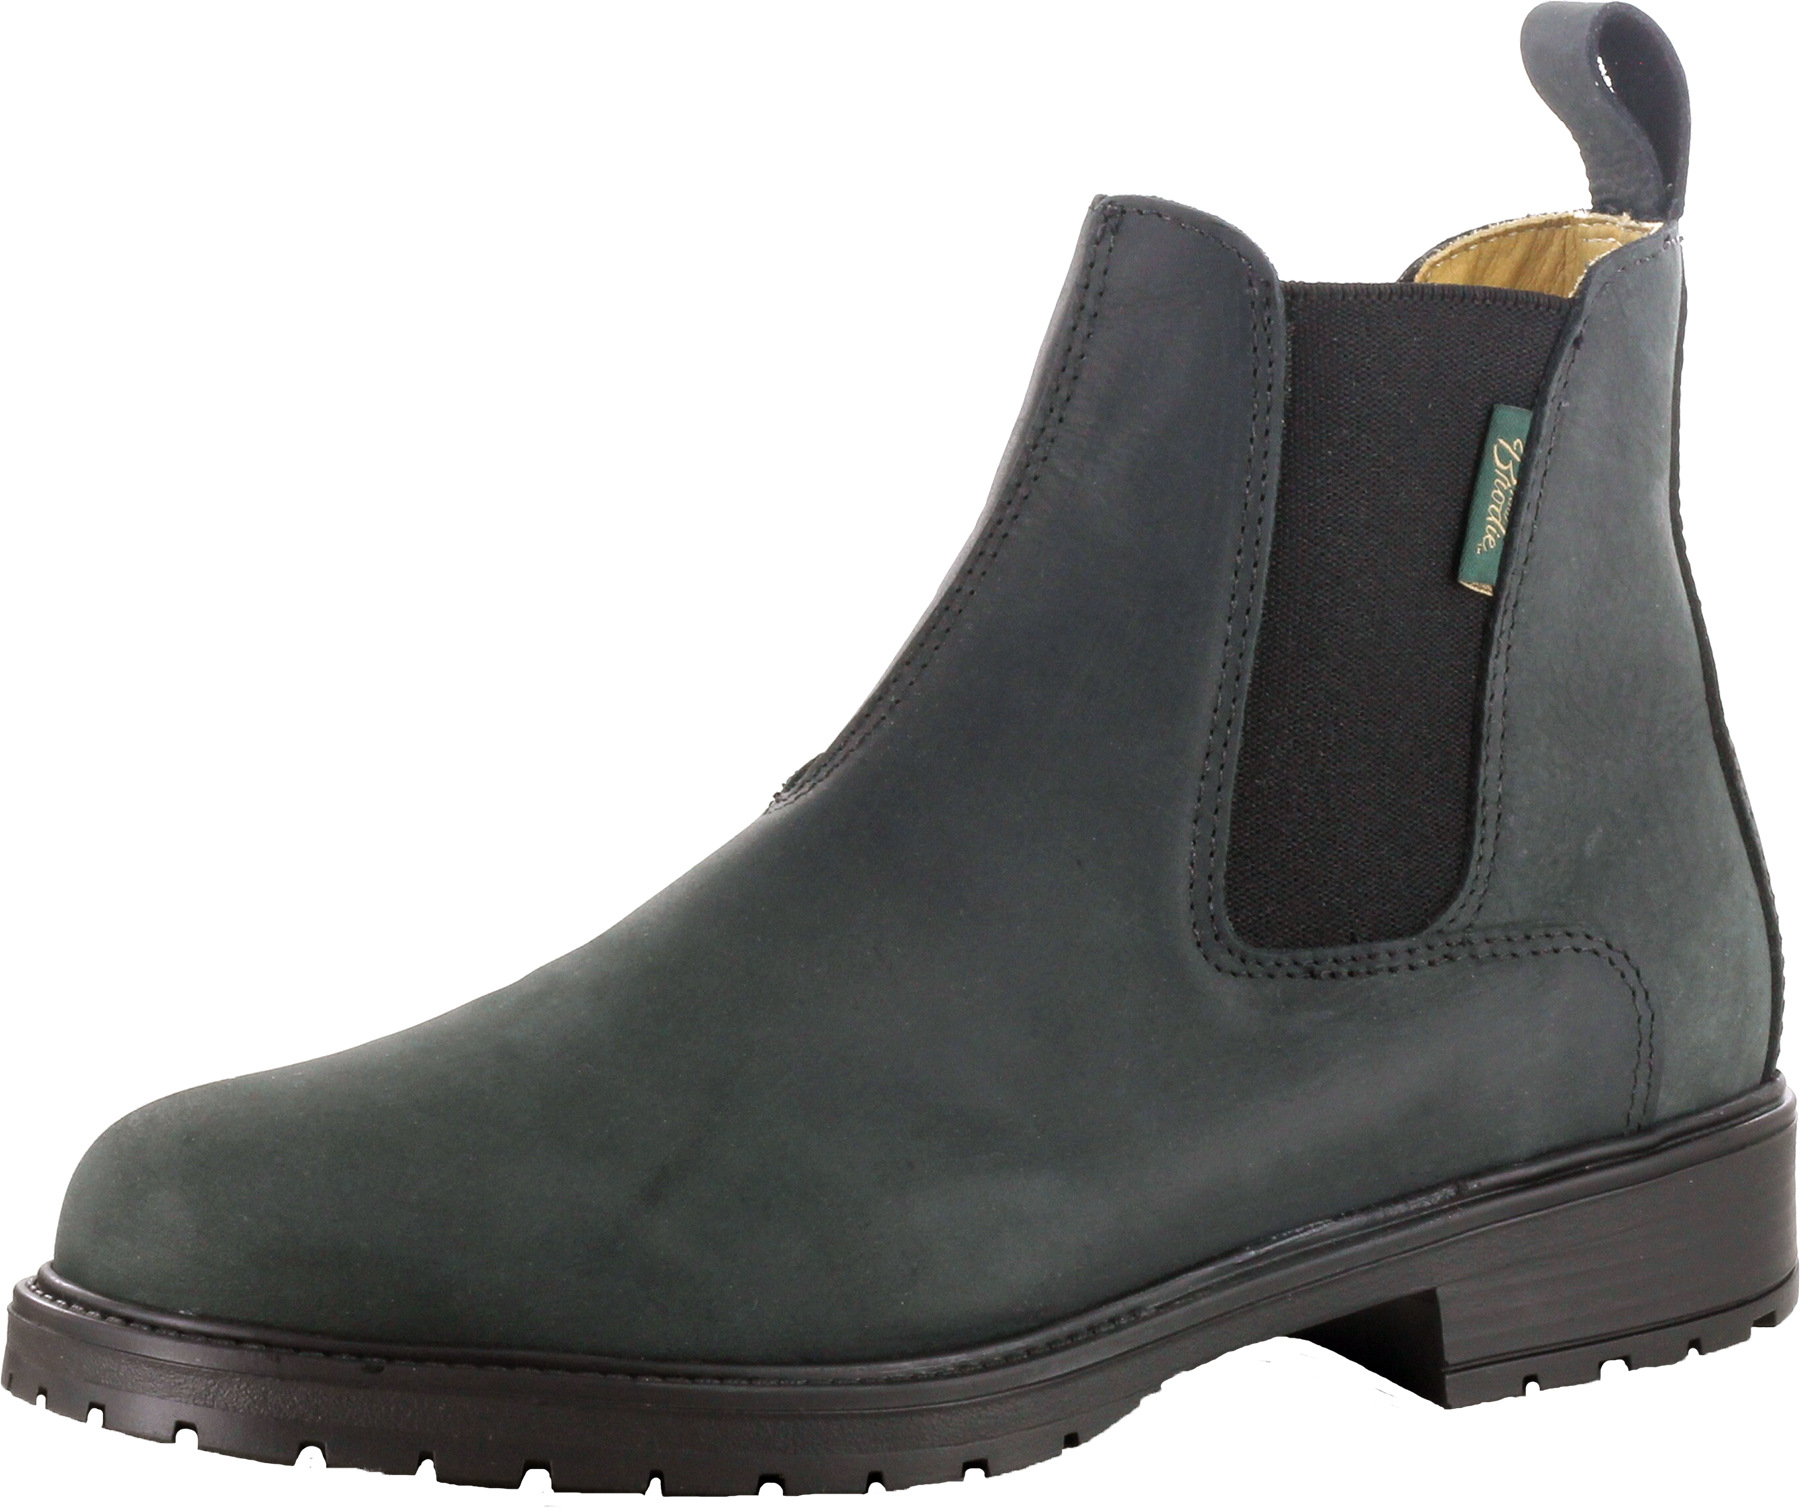 Paul Brodie Double Gore Boot - Charcoal Grey